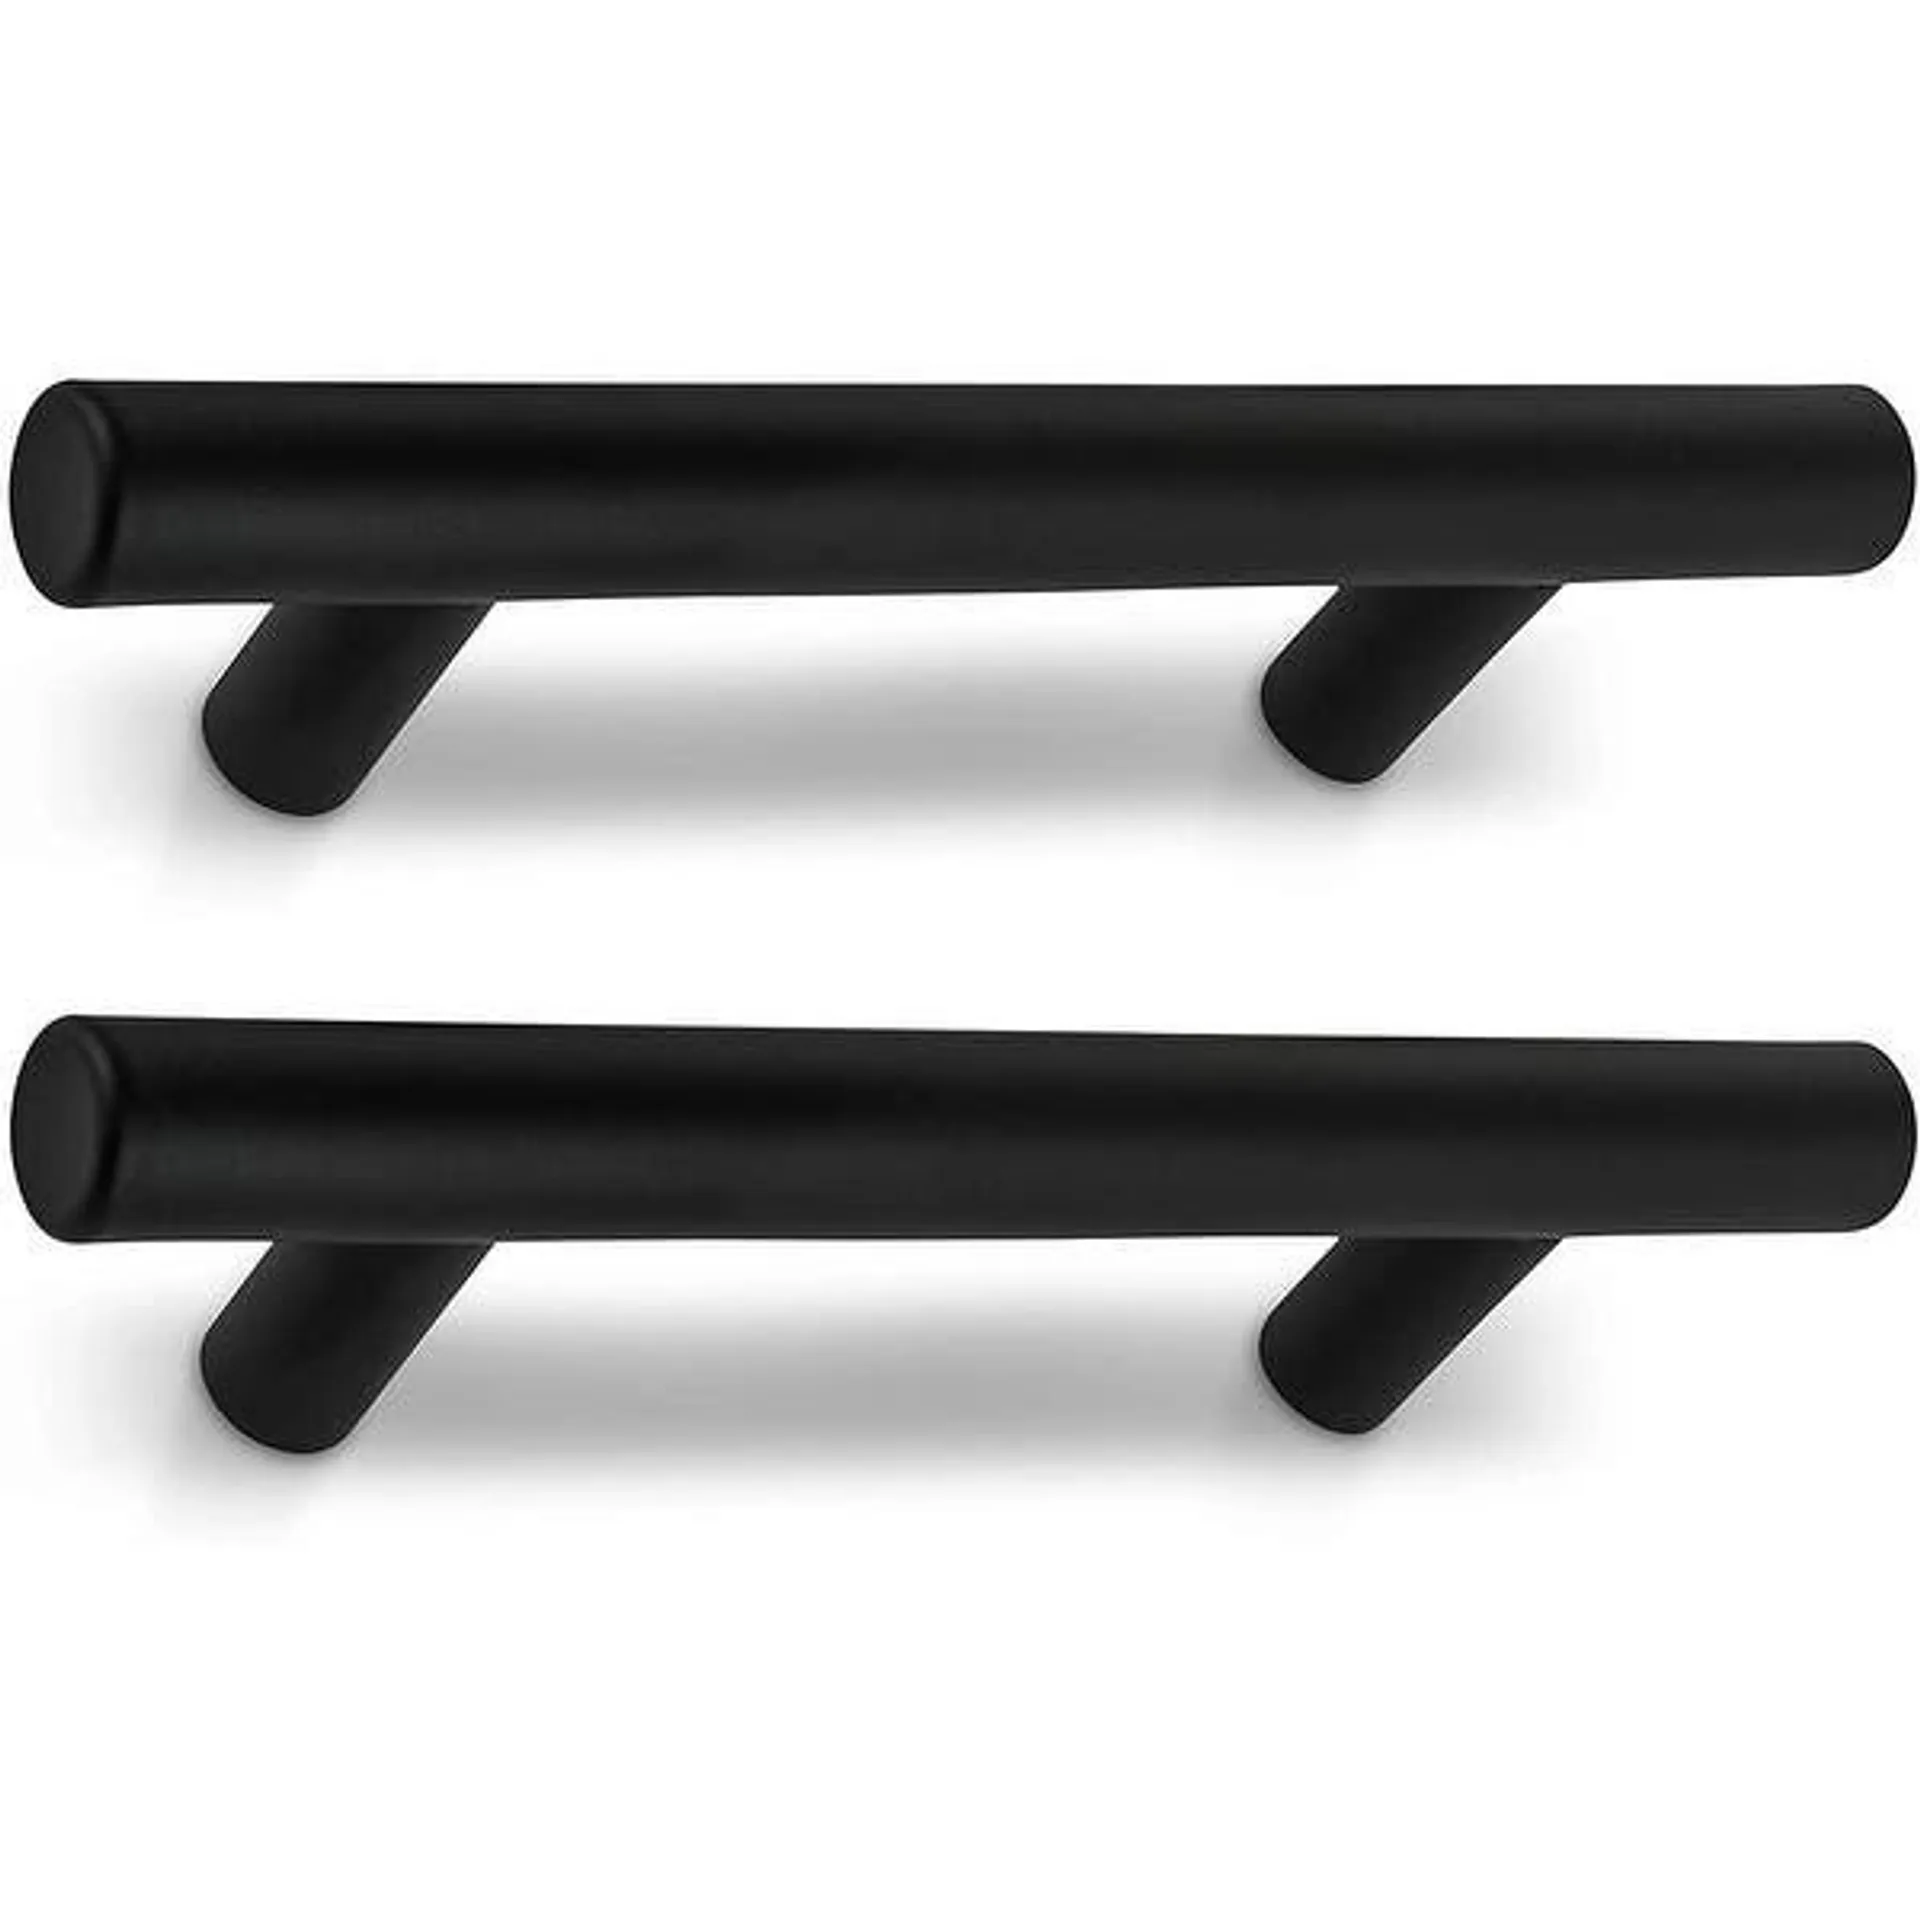 35-Pack Cabinet Pulls 5-Inch Stainless Steel Kitchen Cabinet Pulls - Black